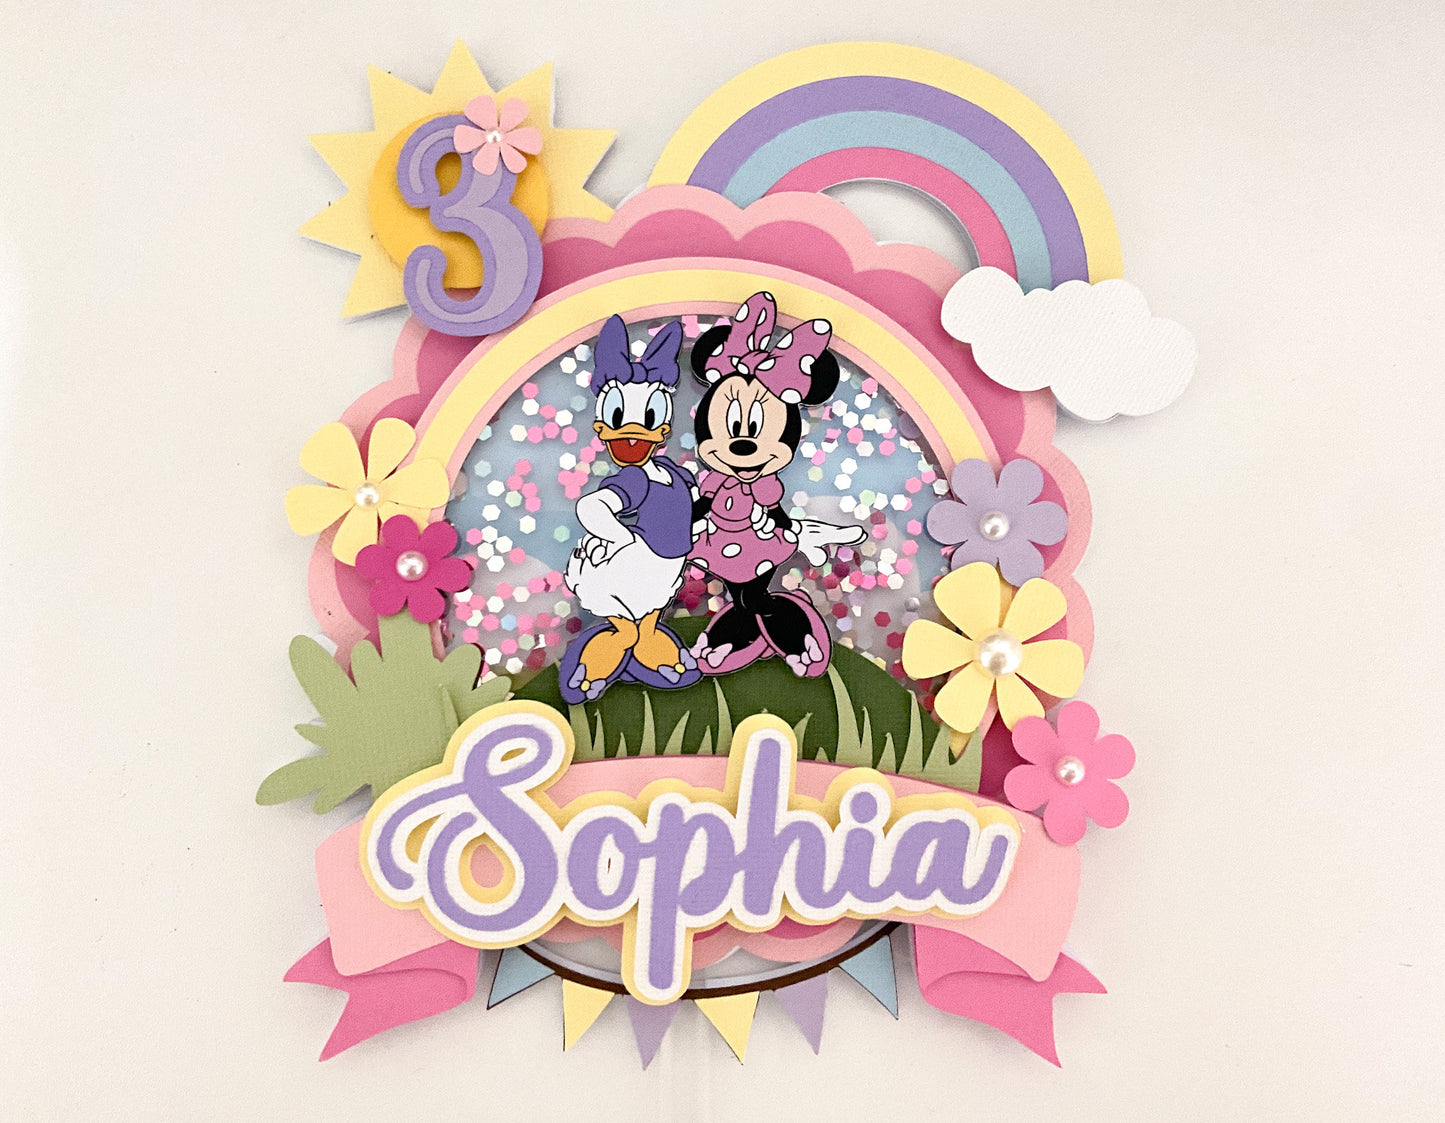 Minnie And Daisy shaker topper | Minnie Mouse birthday | Daisy party | Minnie and daisy birthday | cake smash | birthday decor